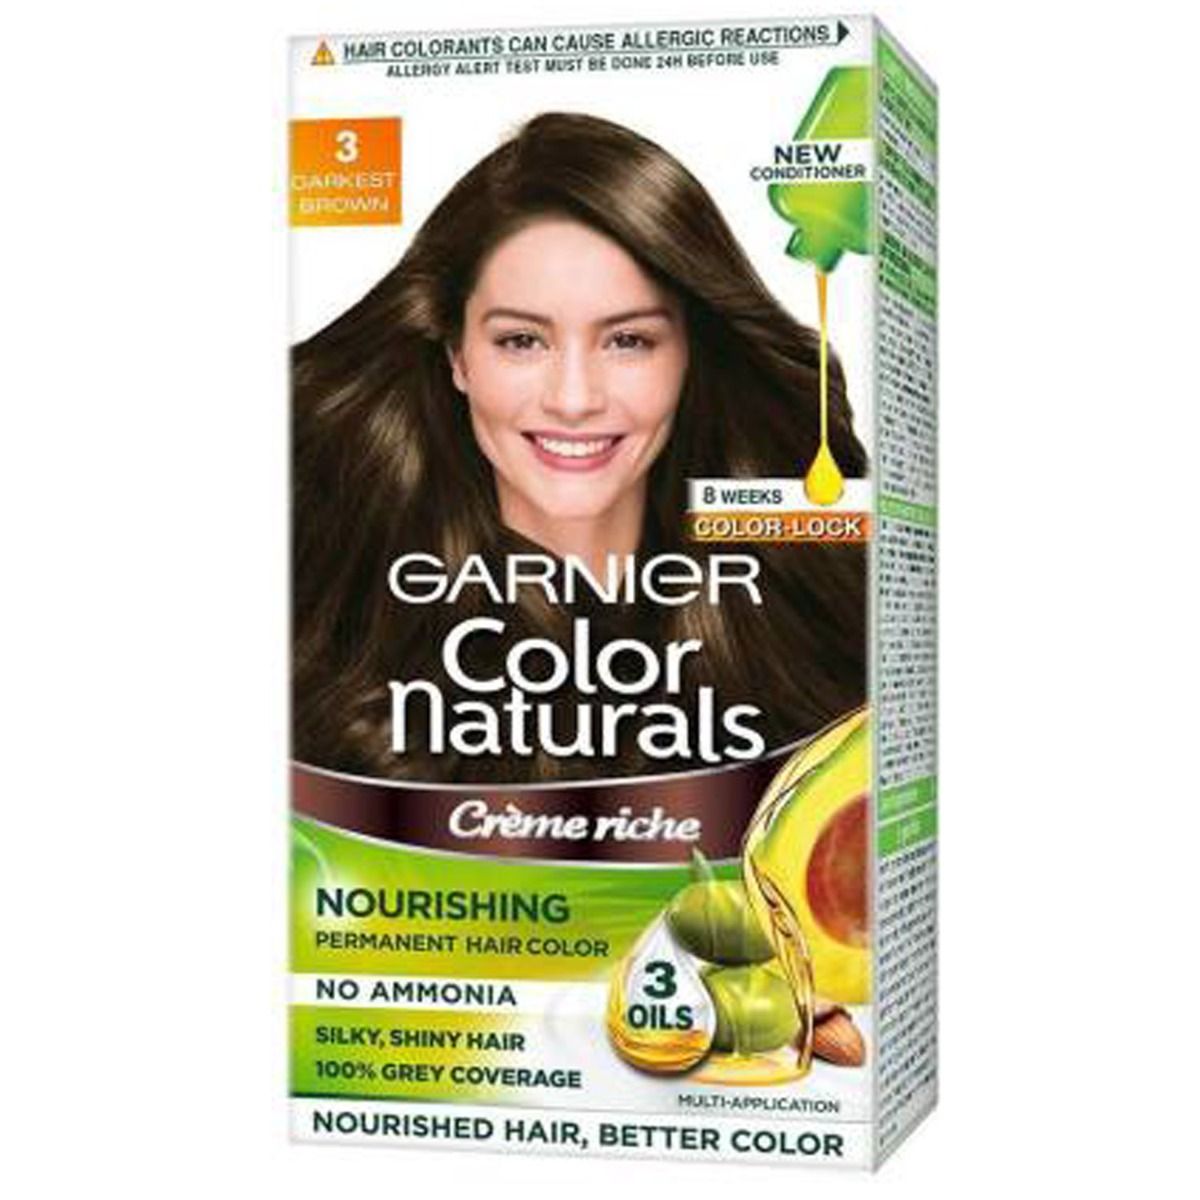 Garnier Color Naturals Shade 3 Hair Color, Darkest Brown, 1 Count Price,  Uses, Side Effects, Composition - Apollo Pharmacy